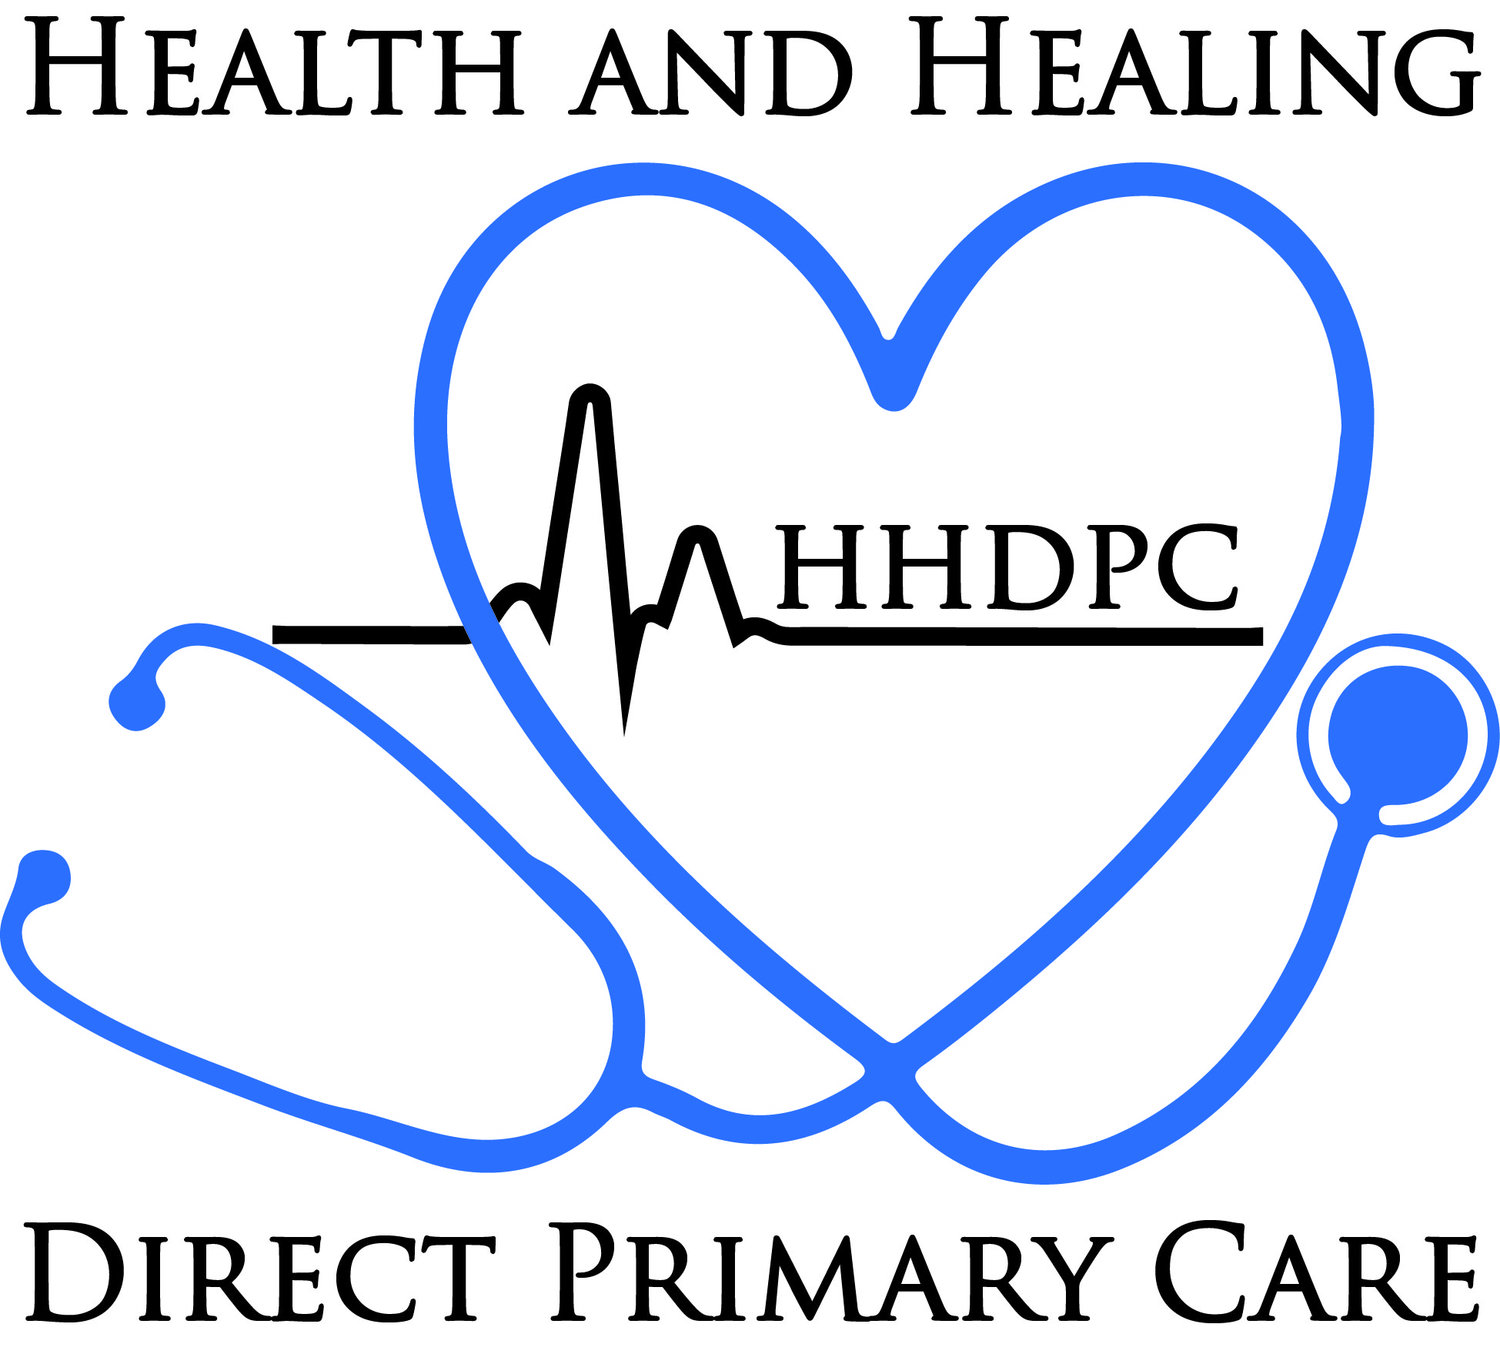 Health and Healing Direct Primary Care